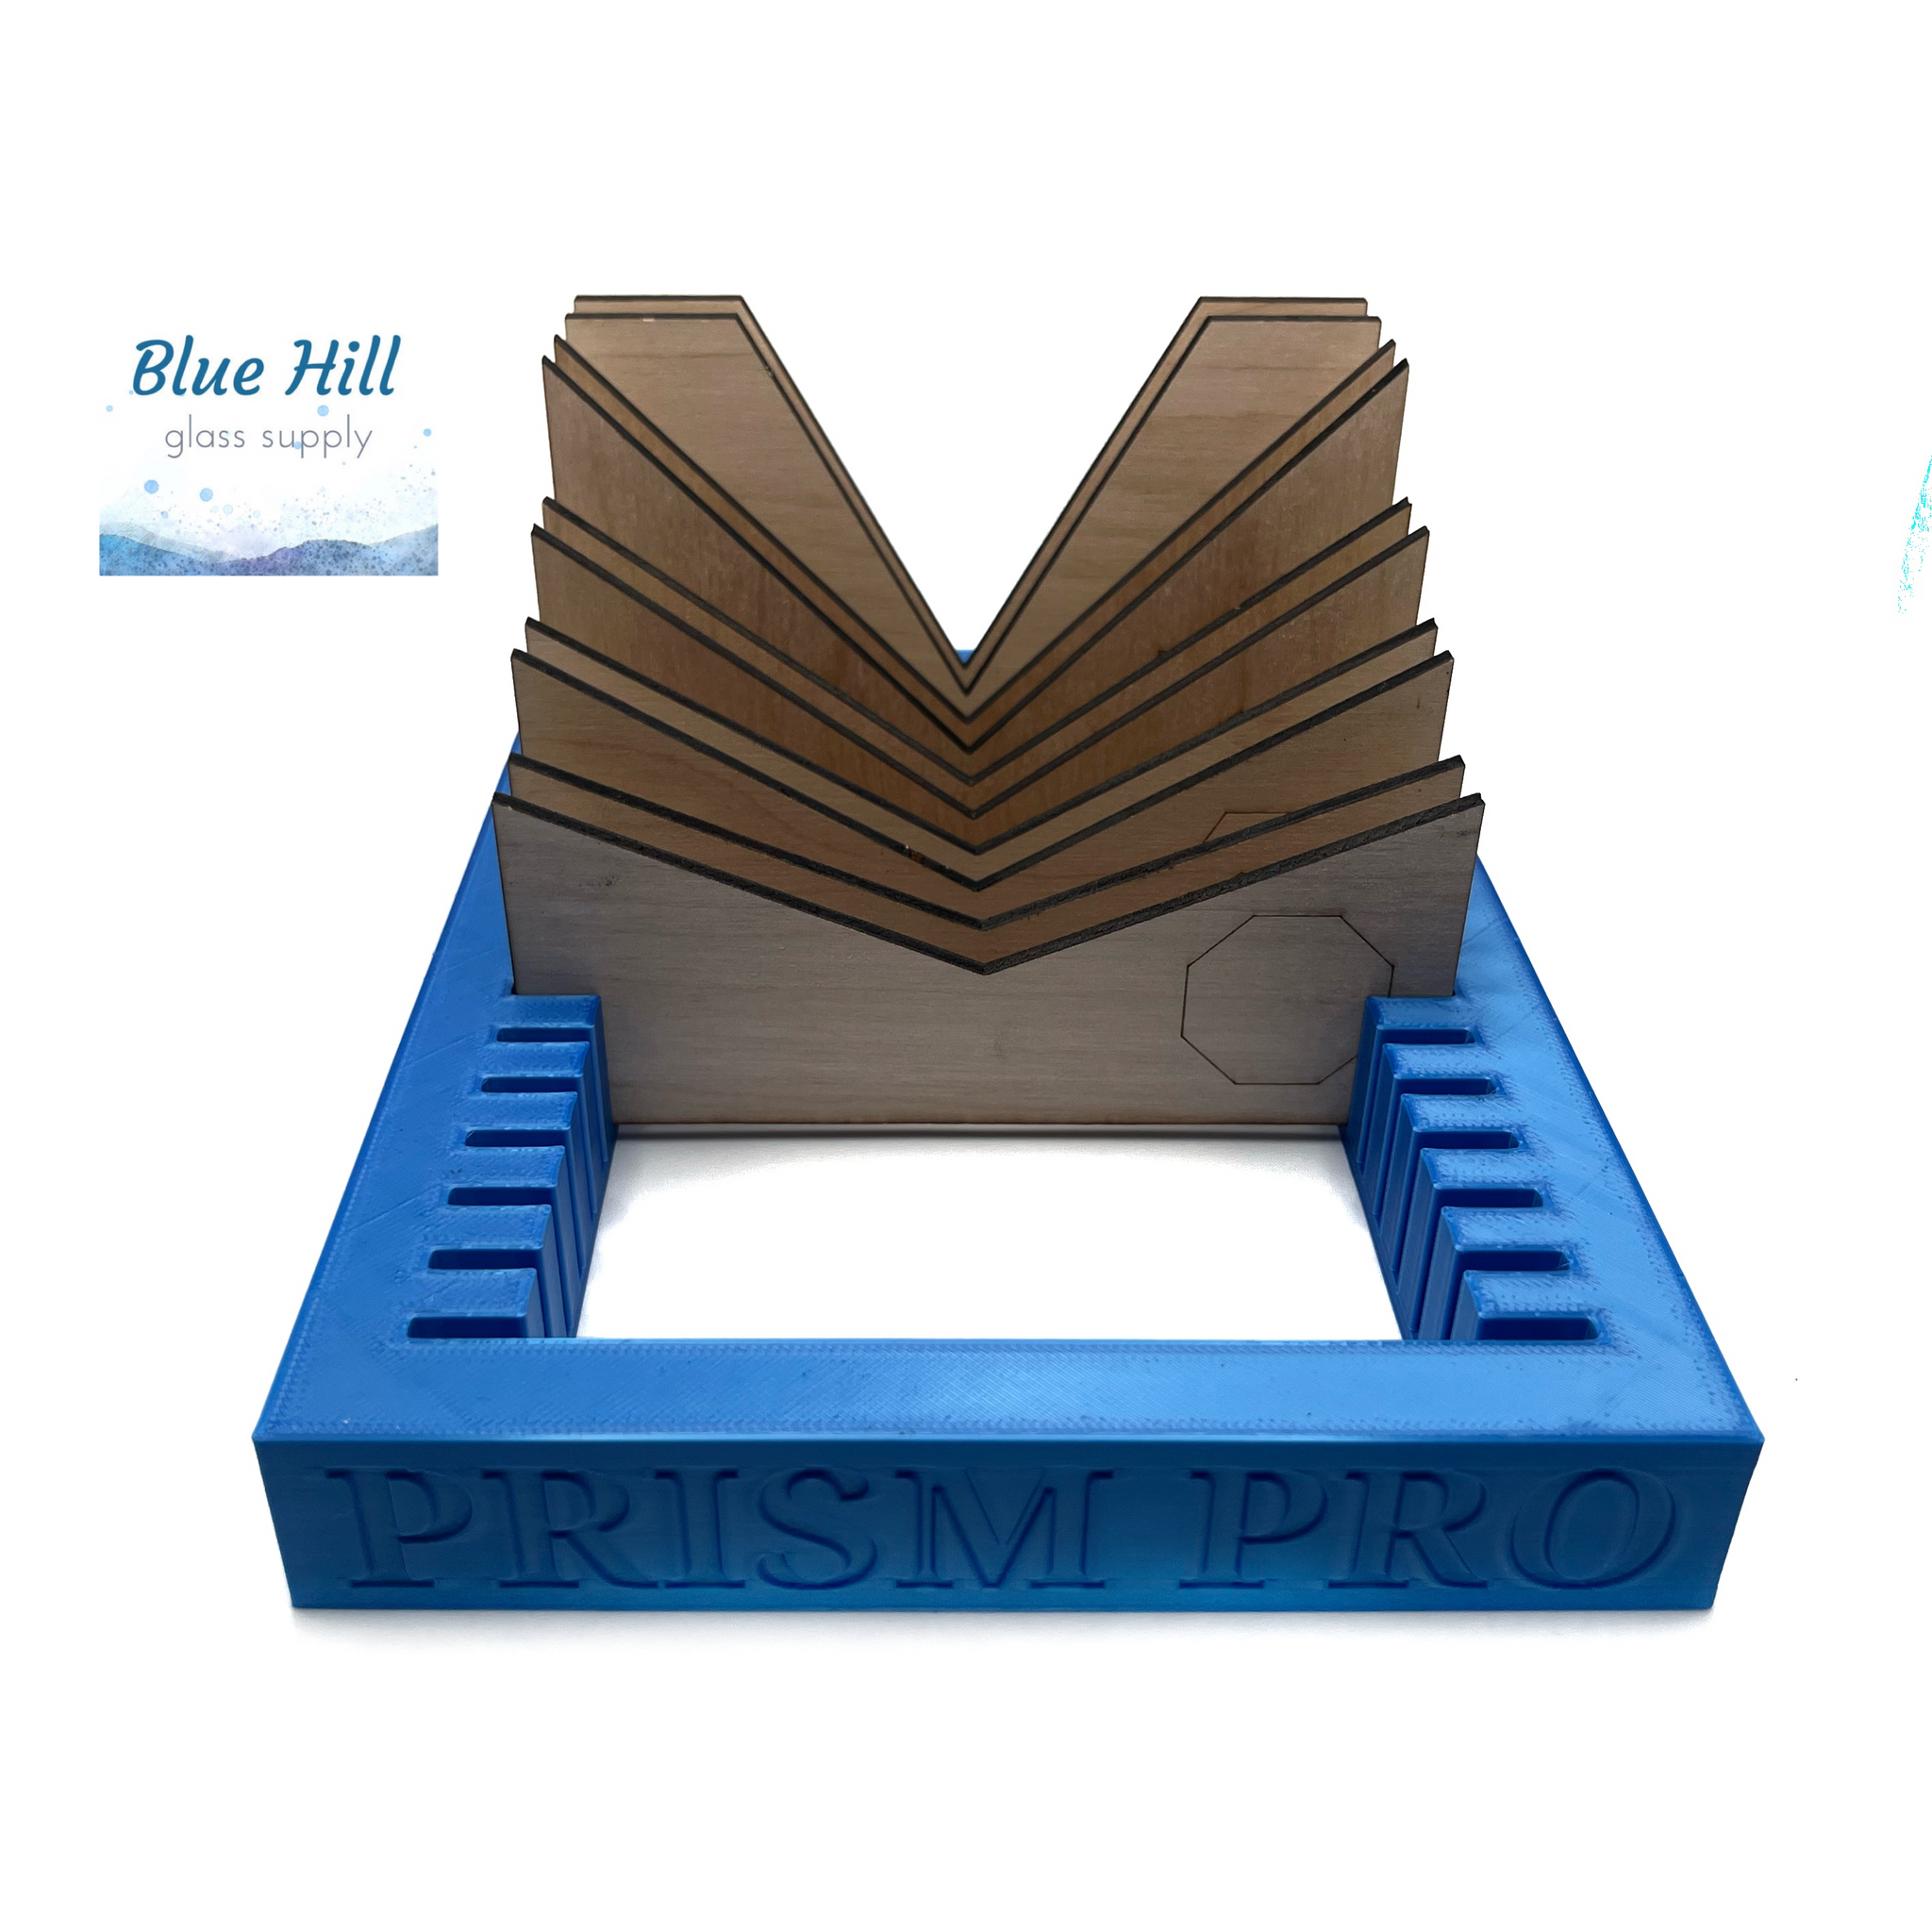 Prism Pro Stained Glass 3D Jig Tool for Making Prisms - Box Maker – Blue  Hill Glass